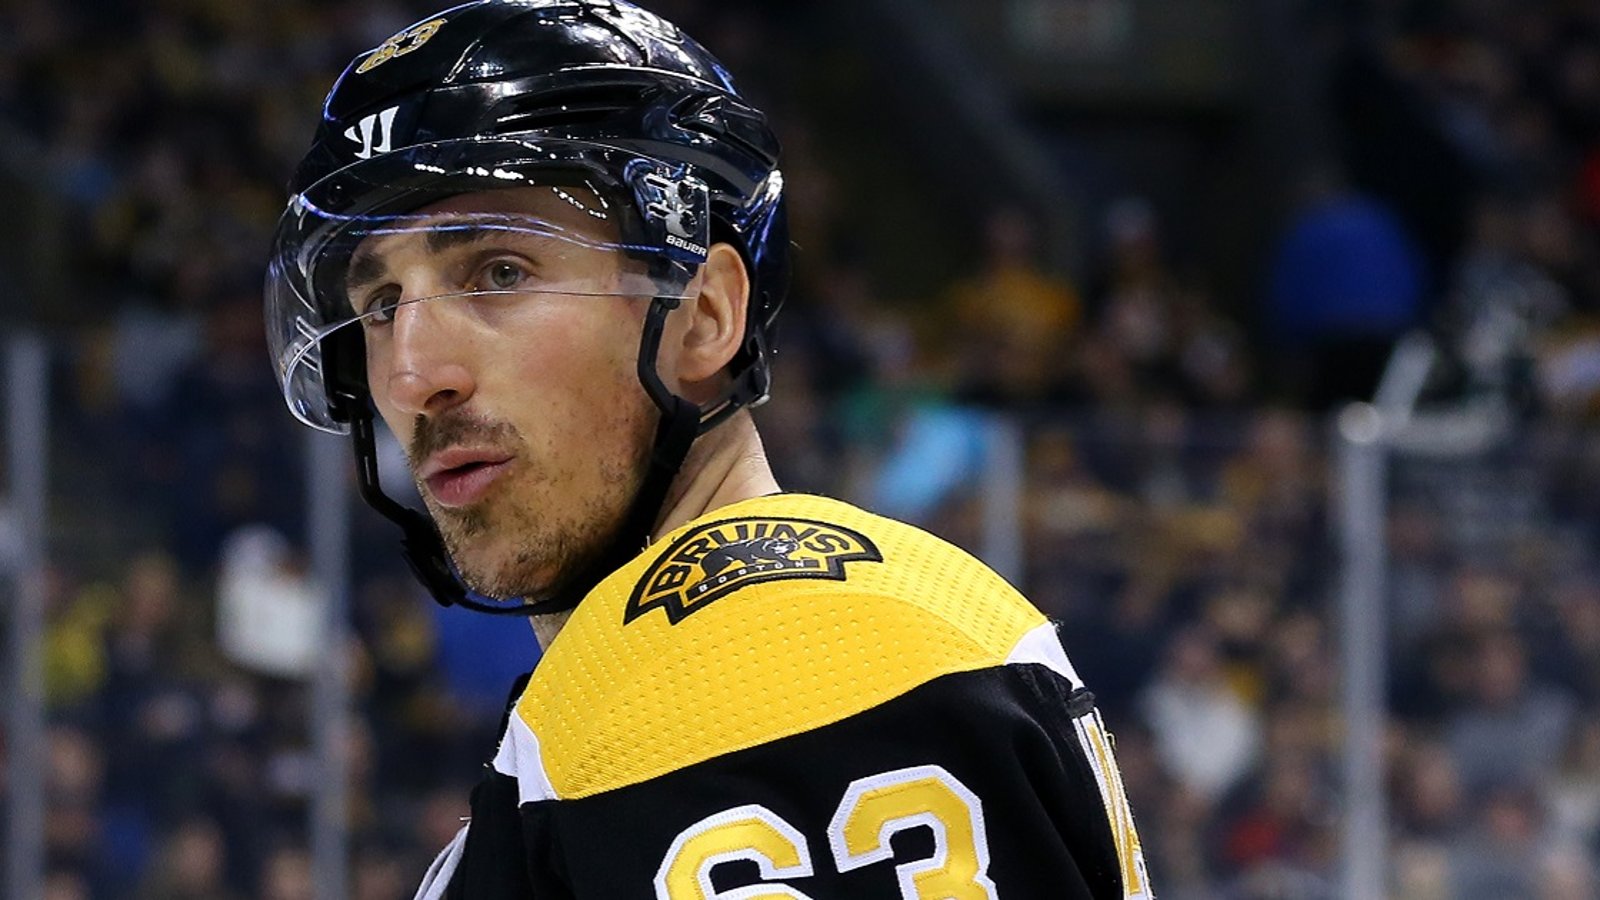 Brad Marchand fires back at critics of his partying.